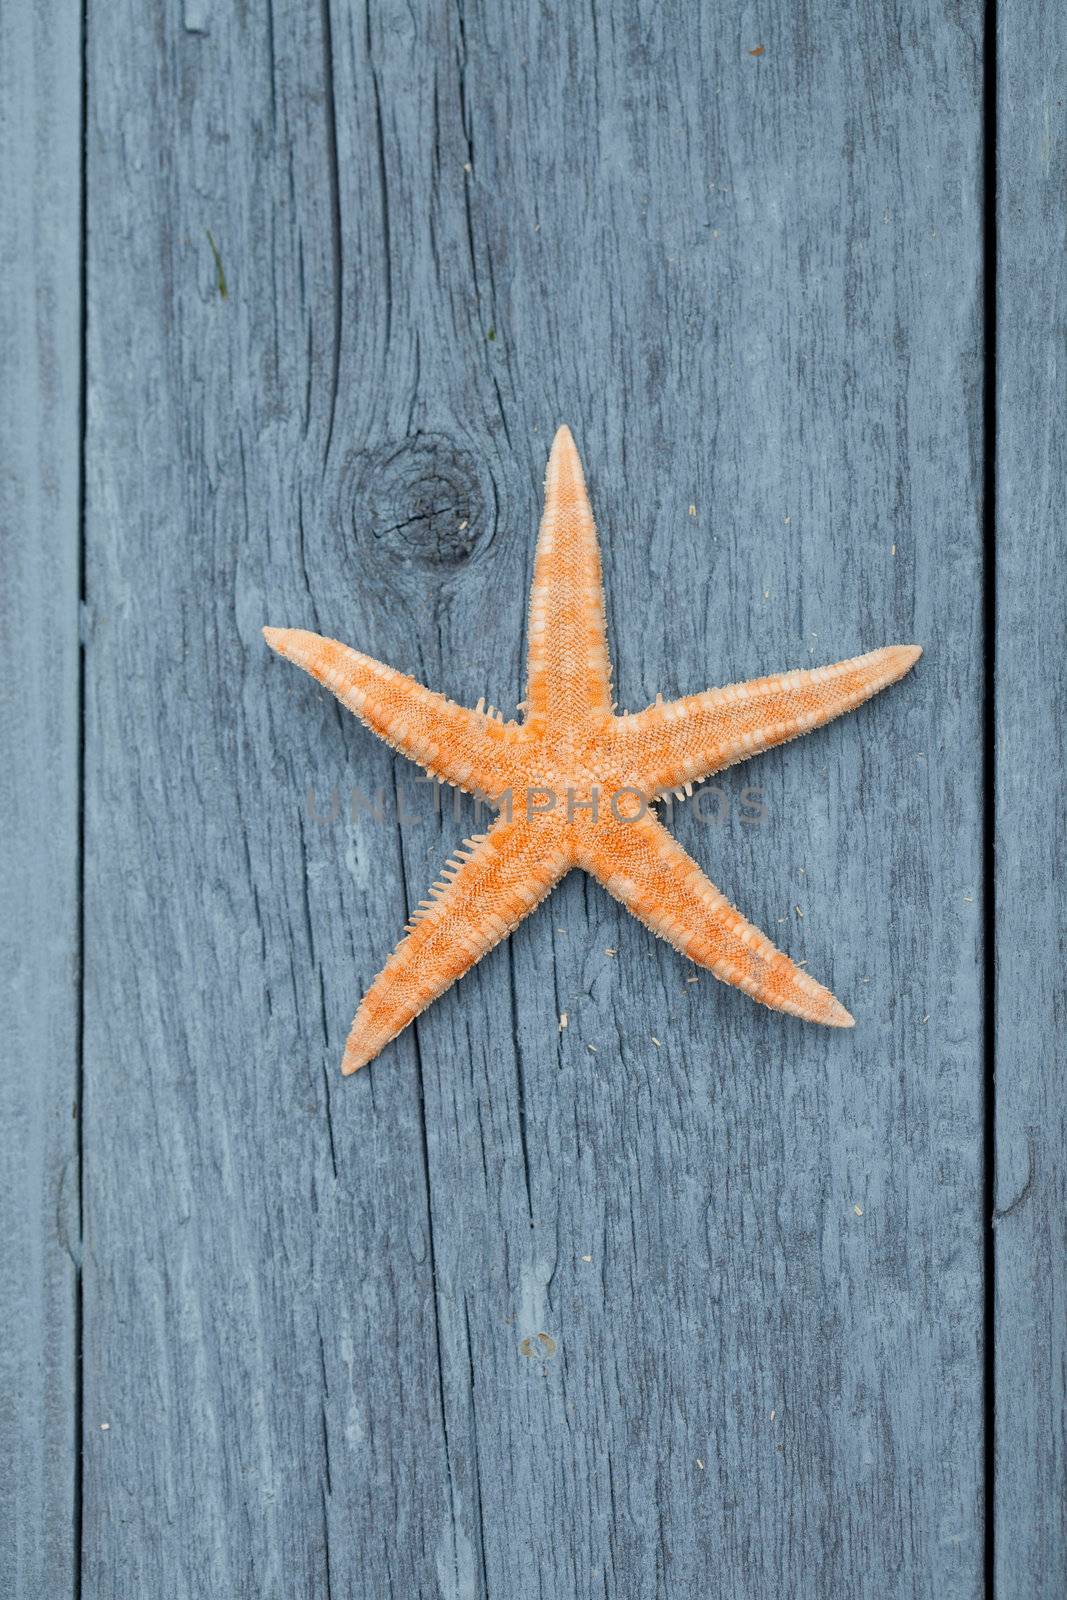 Starfish on wood by Bestpictures